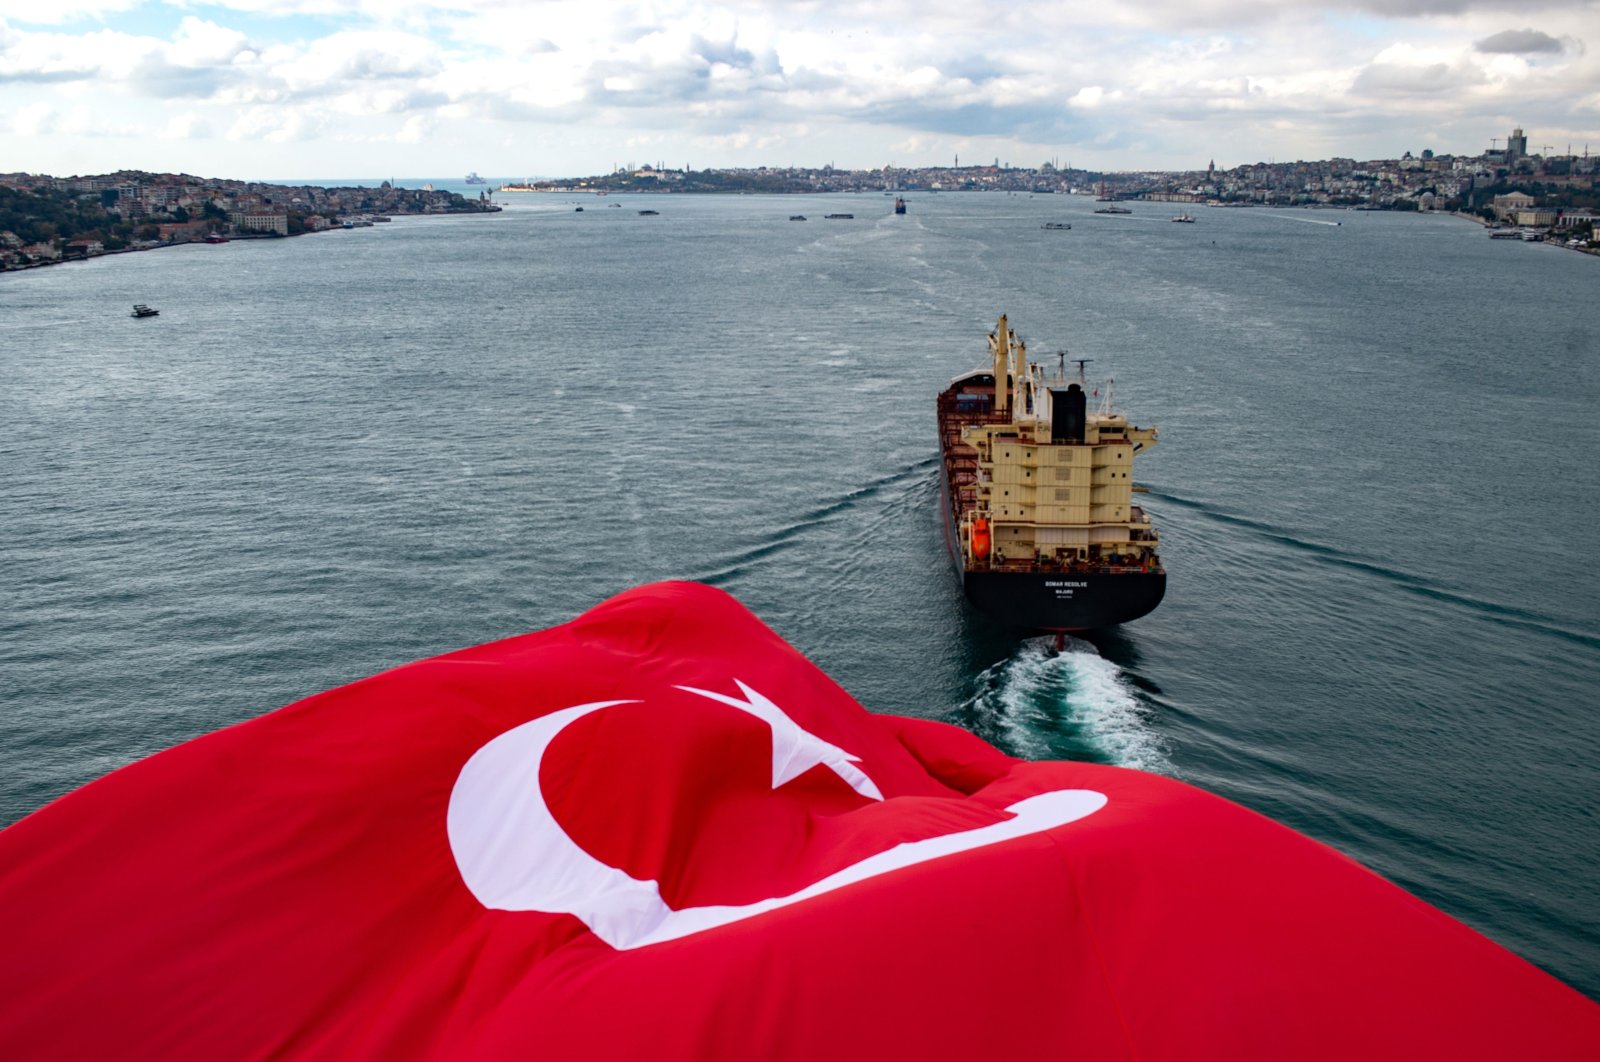 Referee and Goalkeeper of the Turkish Straits: The Relevance and Strategic Implications of the Montreux Convention for Conflict in the Black Sea - Jamestown